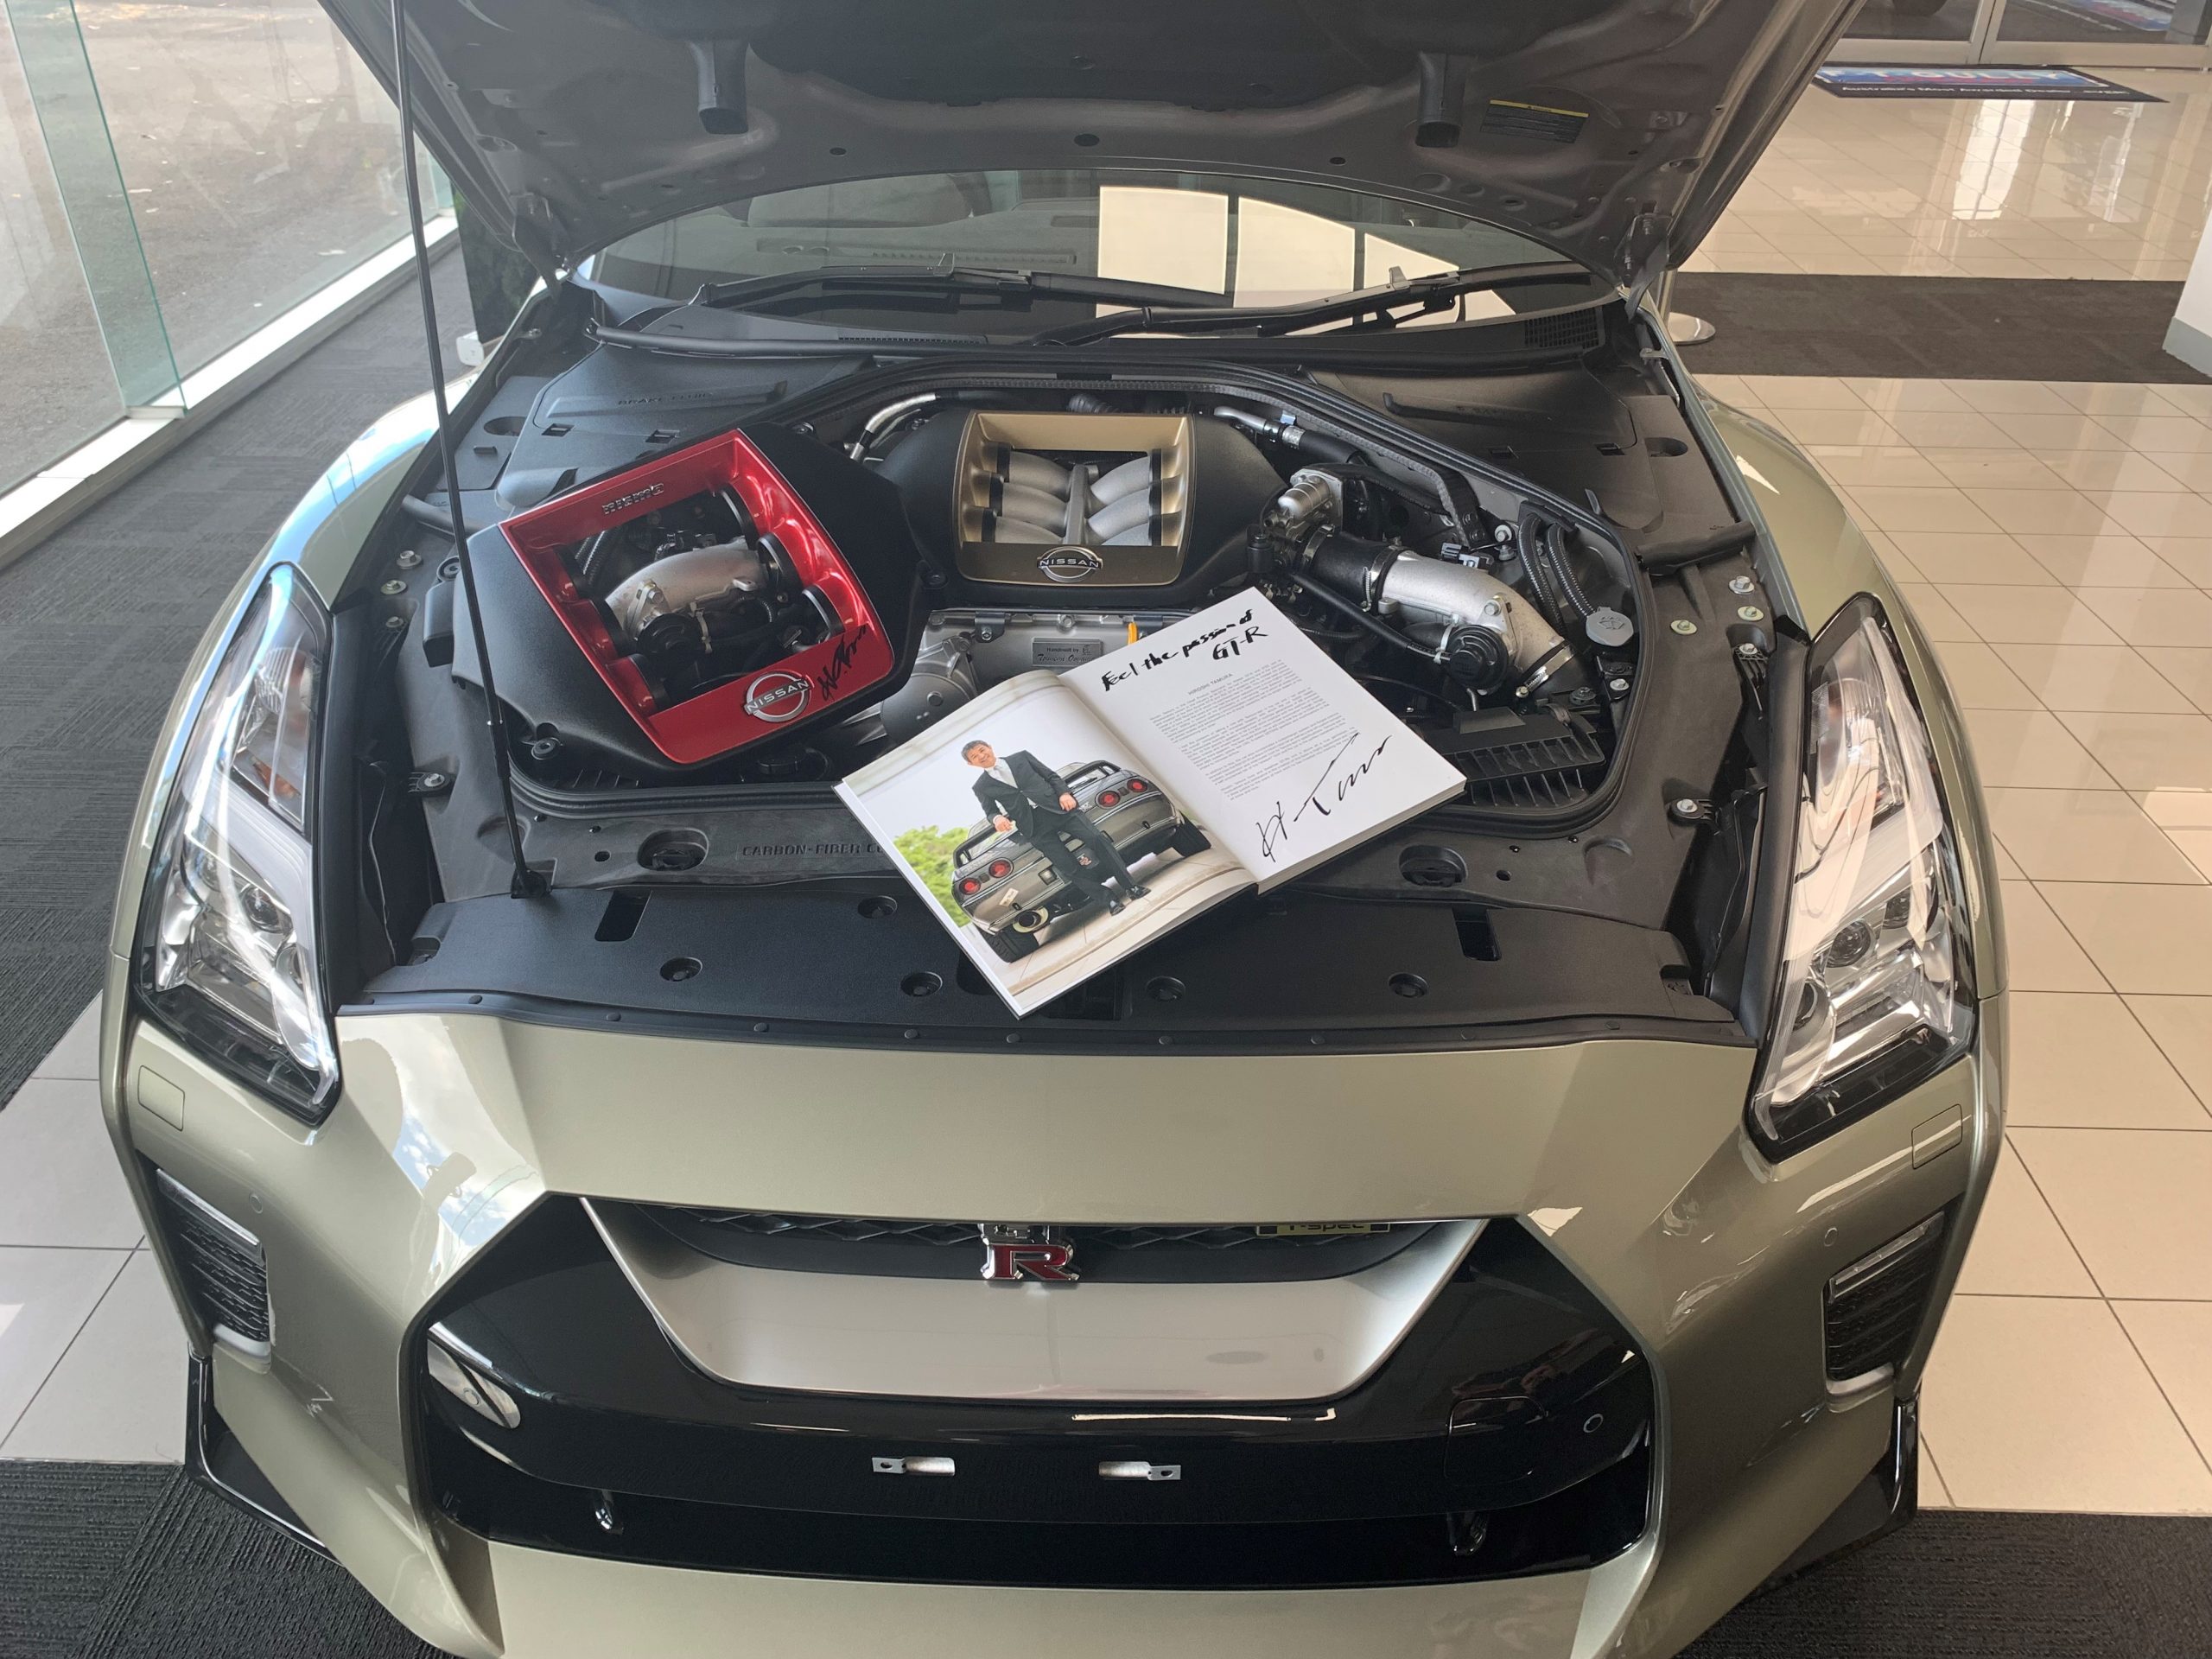 Nissan GT-R Car Book and Engine Cover